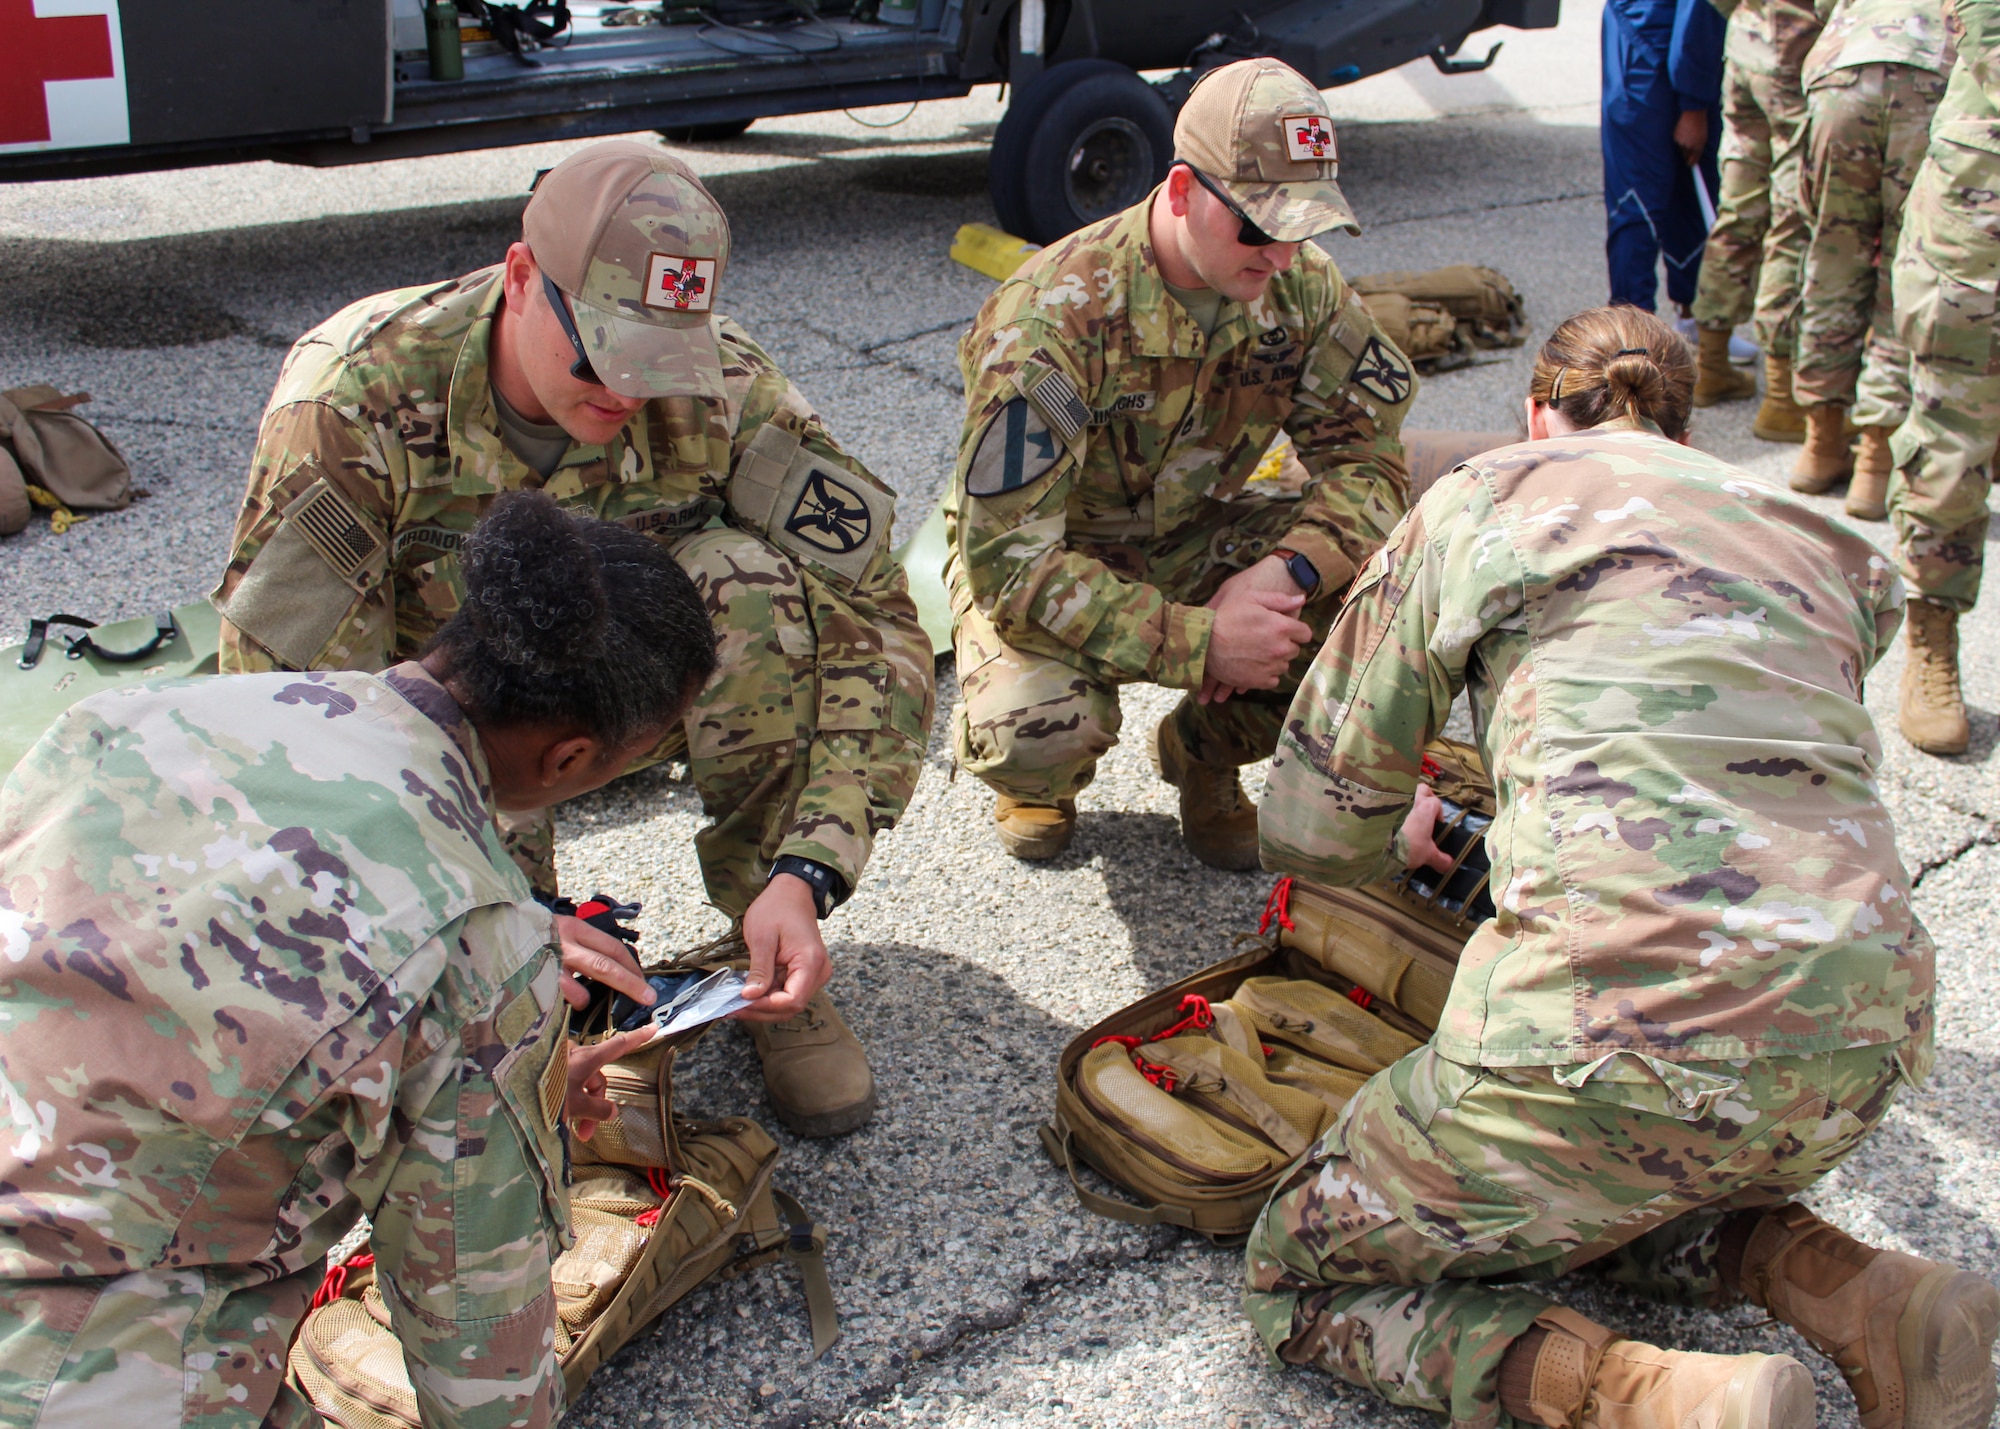 Soldiers from Charlie Company, 2916th Aviation Battalion, 916th Support Brigade, and Airmen from the 412th Medical Group conduct medical training at Edwards Air Force Base, California, March 3. (Air Force photo by Laura Maples)